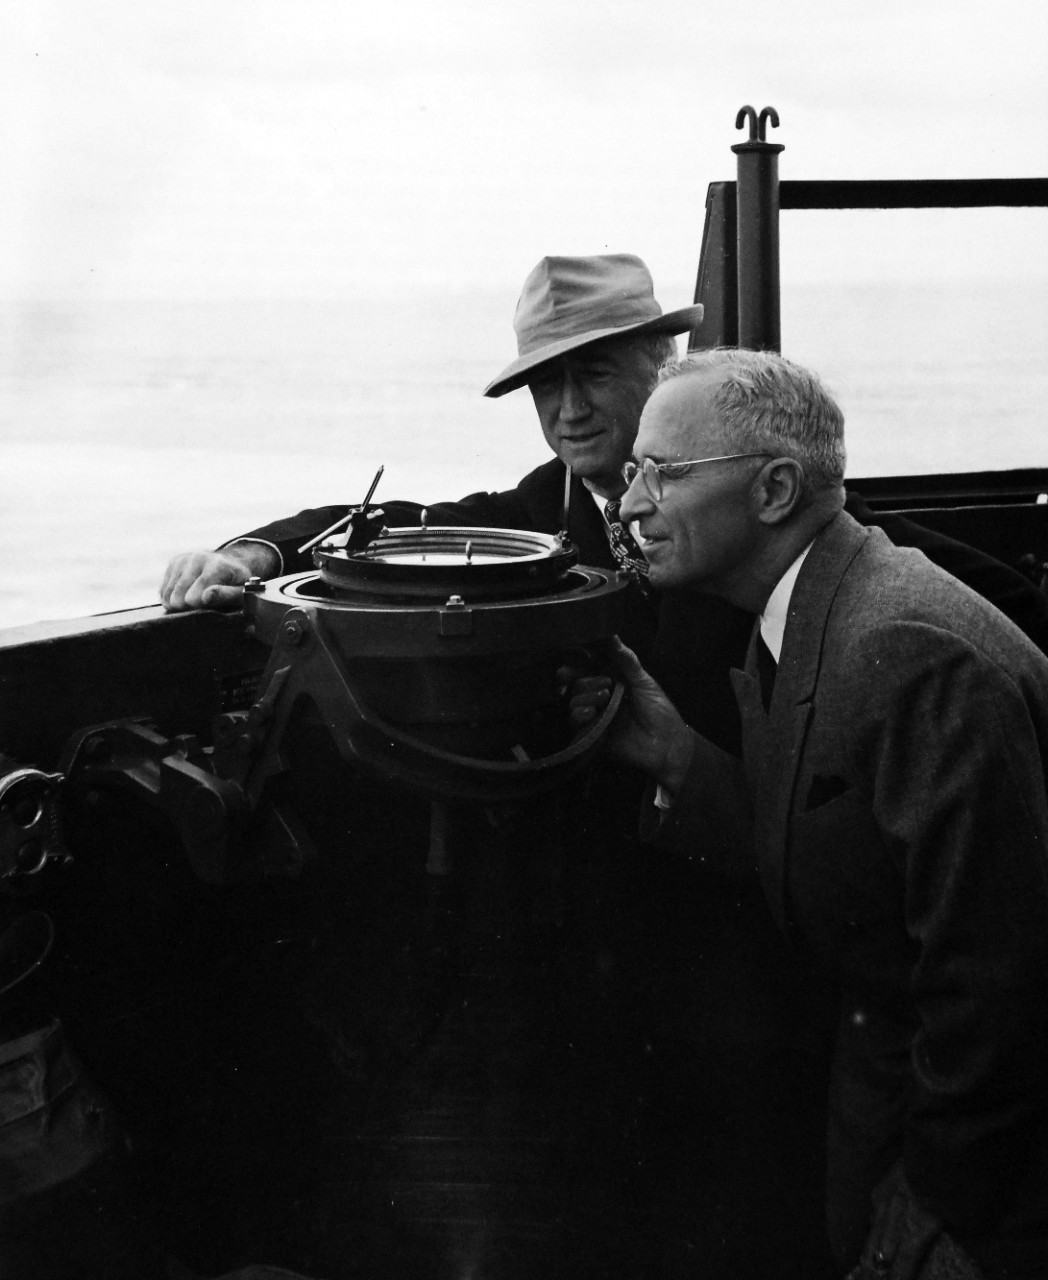 80-G-49924:  Potsdam Conference, July-August 1945.  President Harry S. Truman onboard USS Augusta (CA-31) en-route to Antwerp for the “Big Three” Conference.  Shown:  The President taking a bearing of USS Philadelphia (CL-41) which is ahead of them on the pelorus.  Secretary of State James F. Byrnes is next to the President.    Photograph received July 18, 1945.  Official U.S. Navy Photograph, now in the collections of the National Archives.  (2016/02/23).